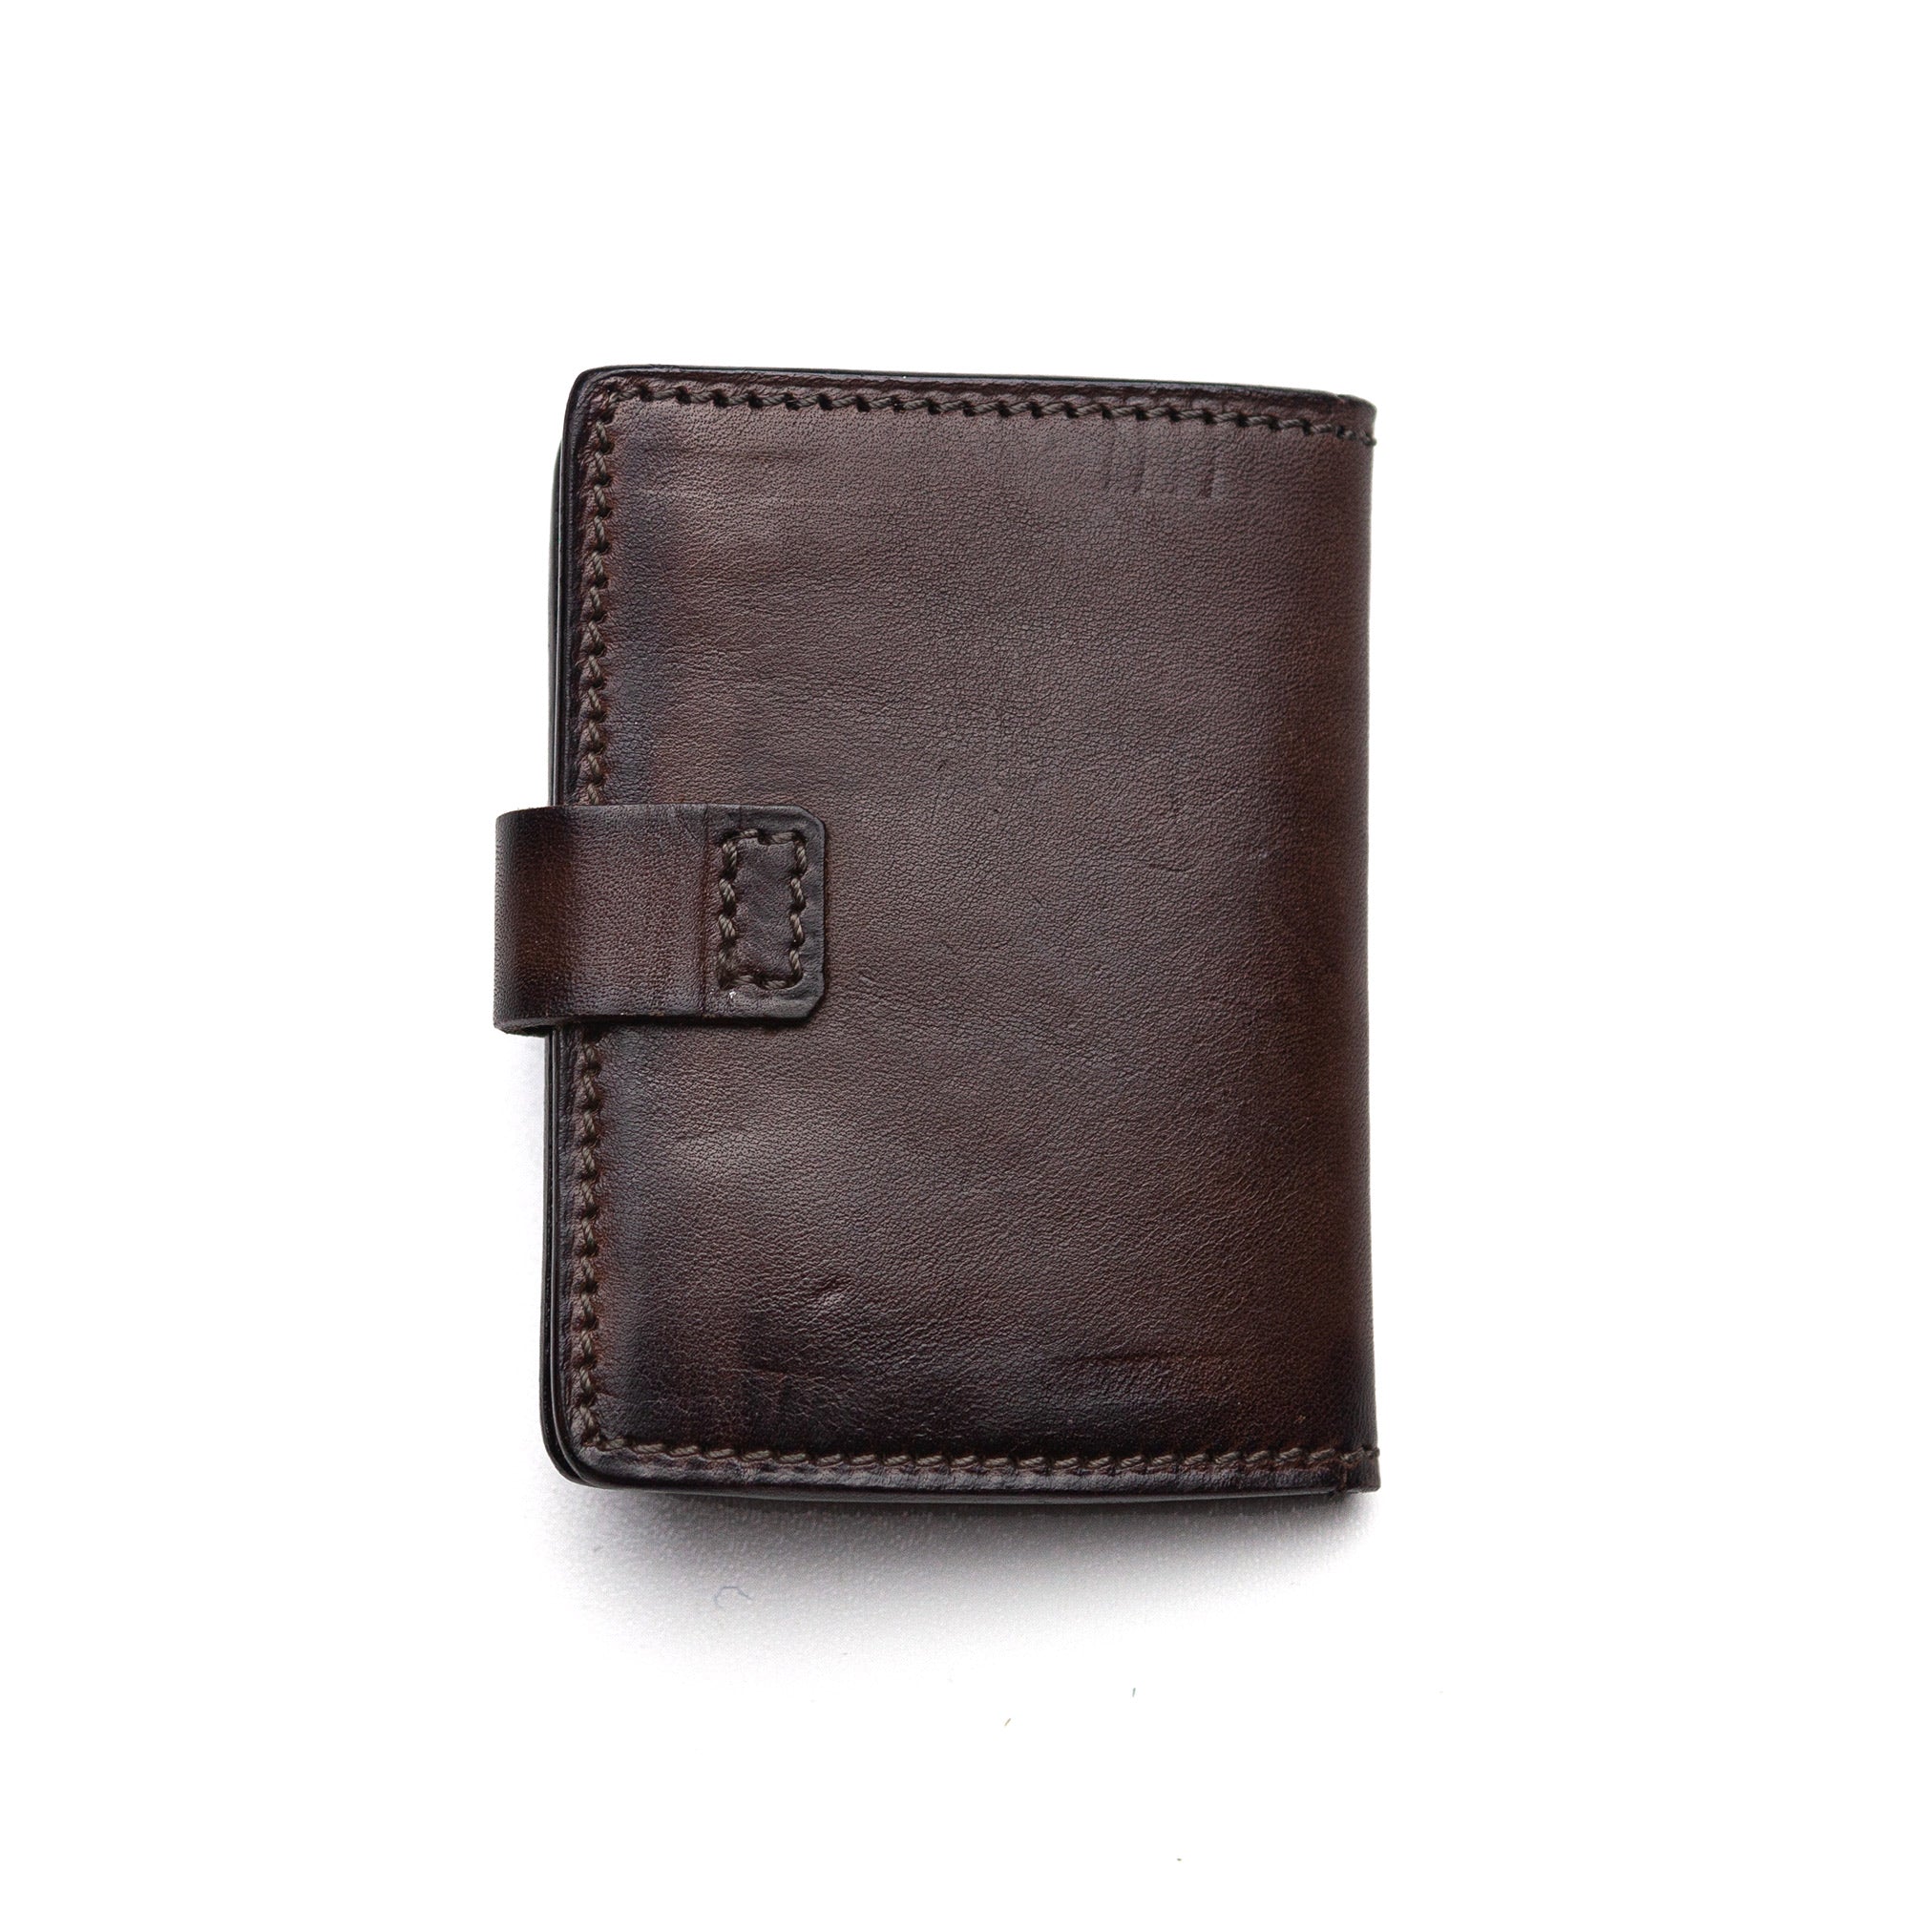 Dark Leather Card Holder With Stud